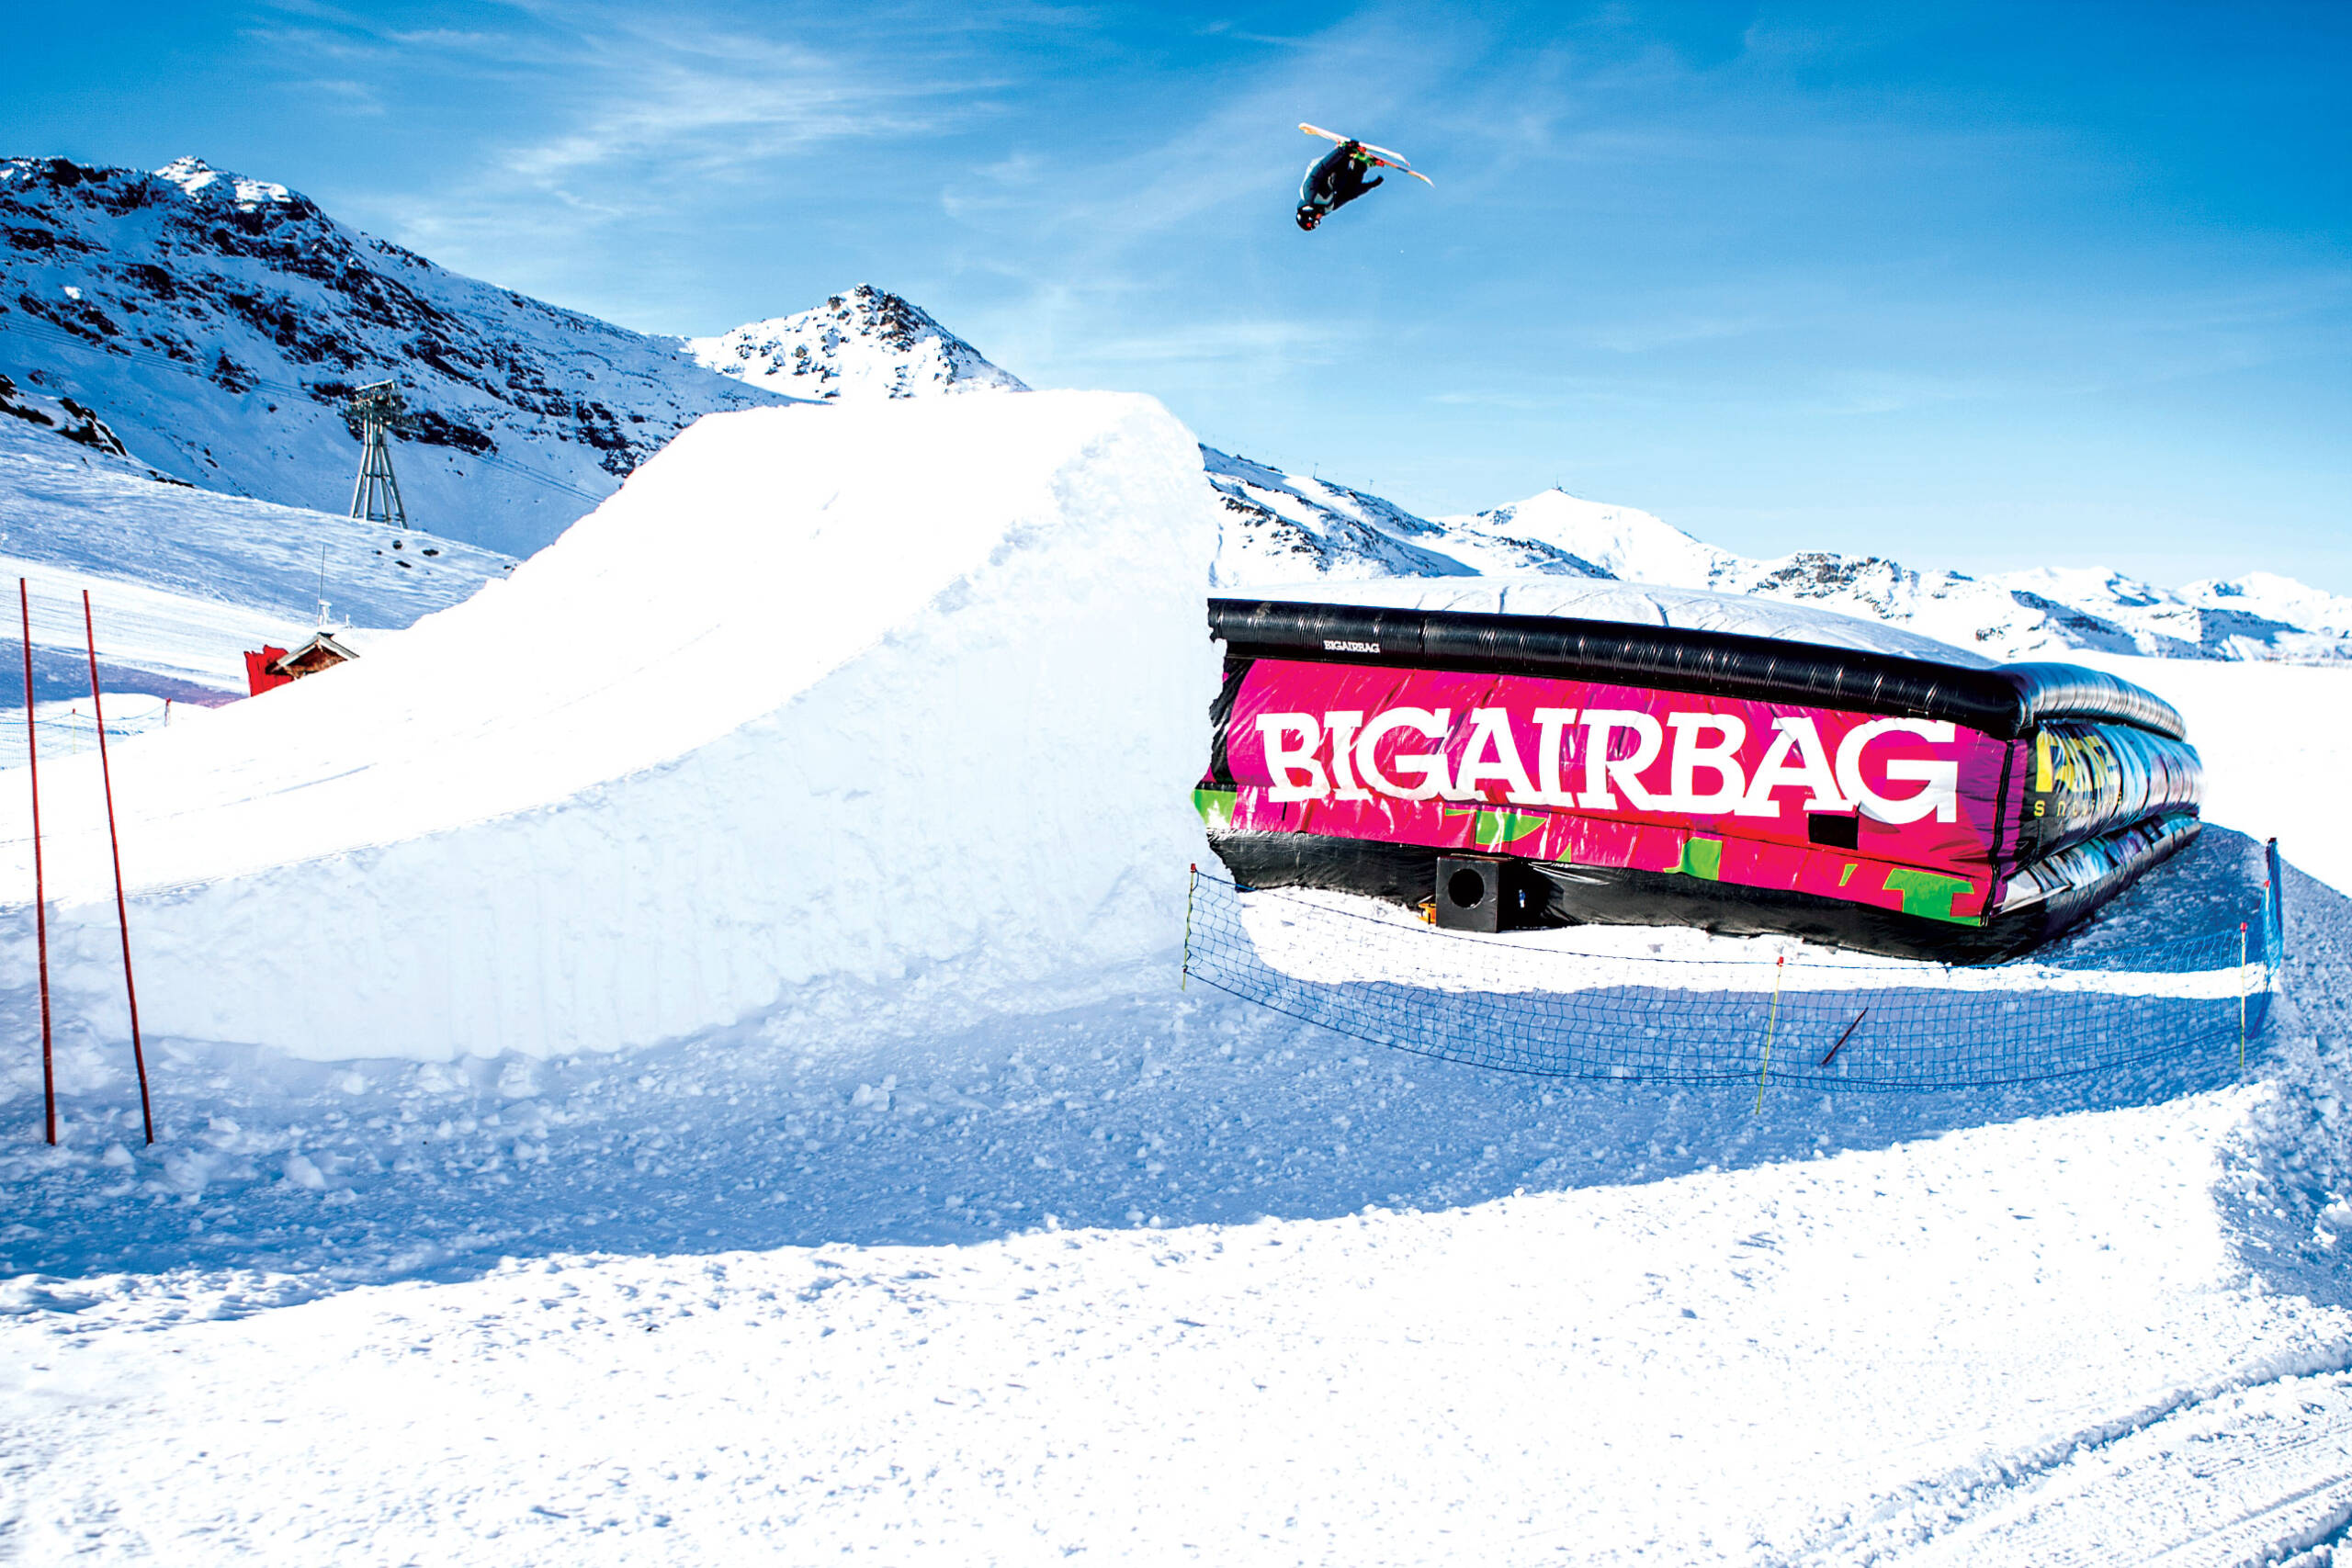 Snowboarder jumping off ramp on to BigAirBag